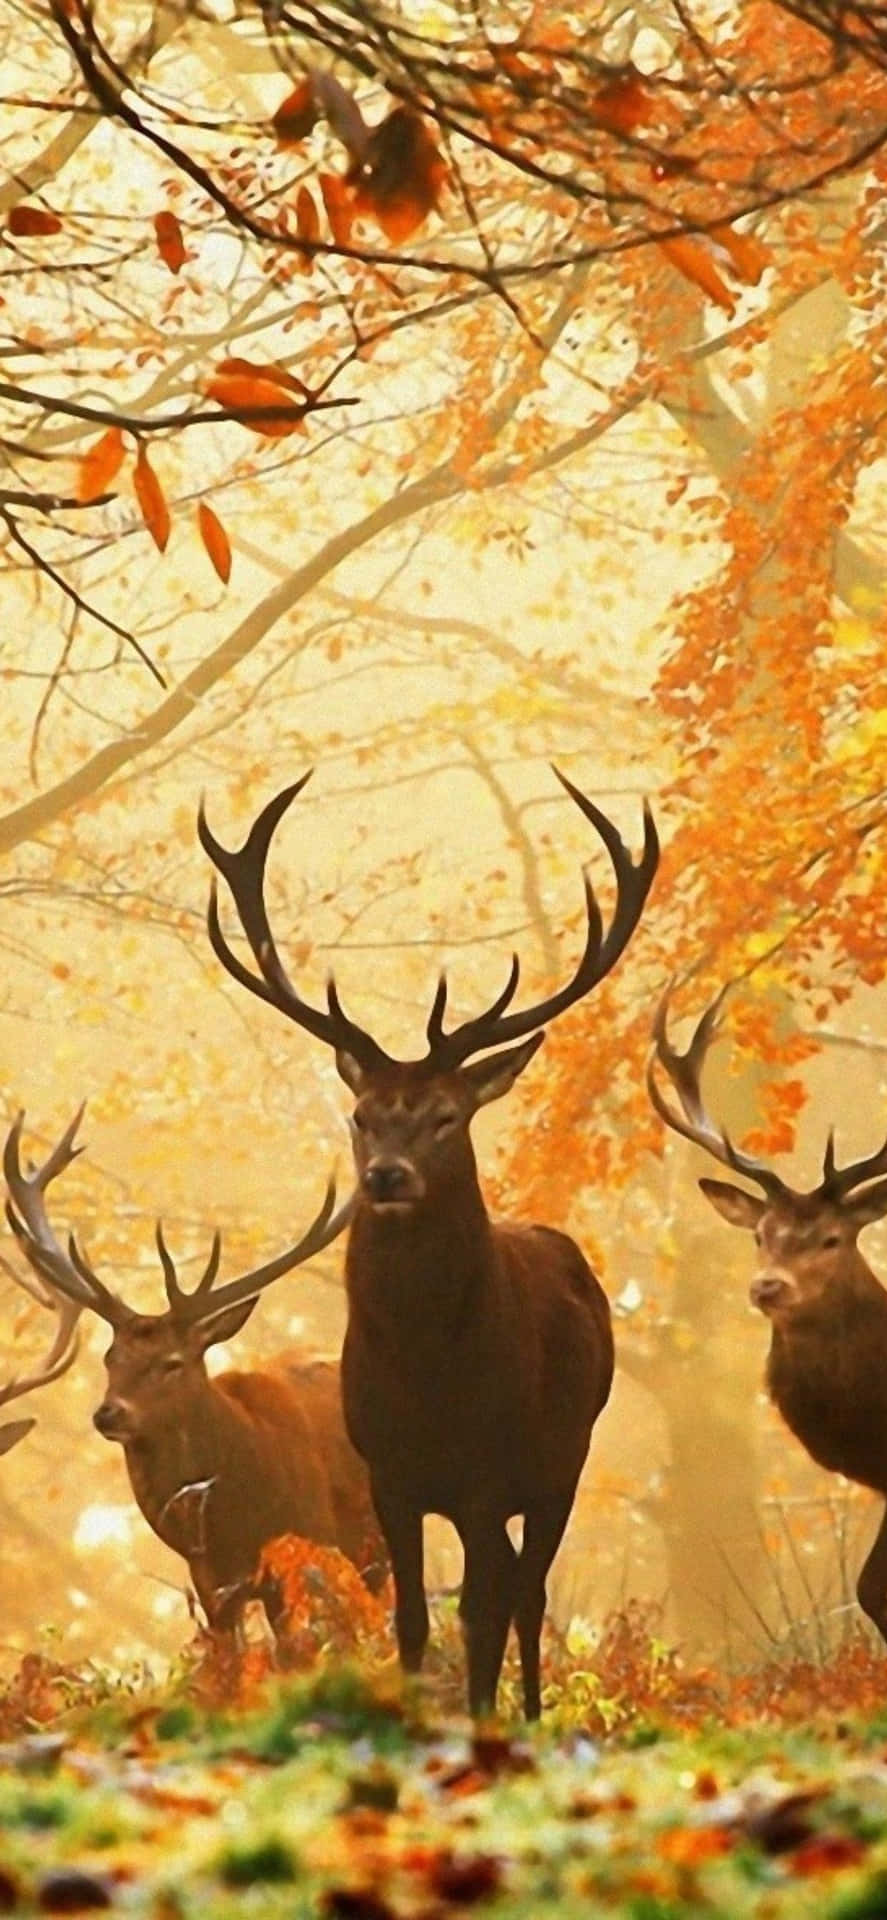 Deer In The Forest With Autumn Leaves